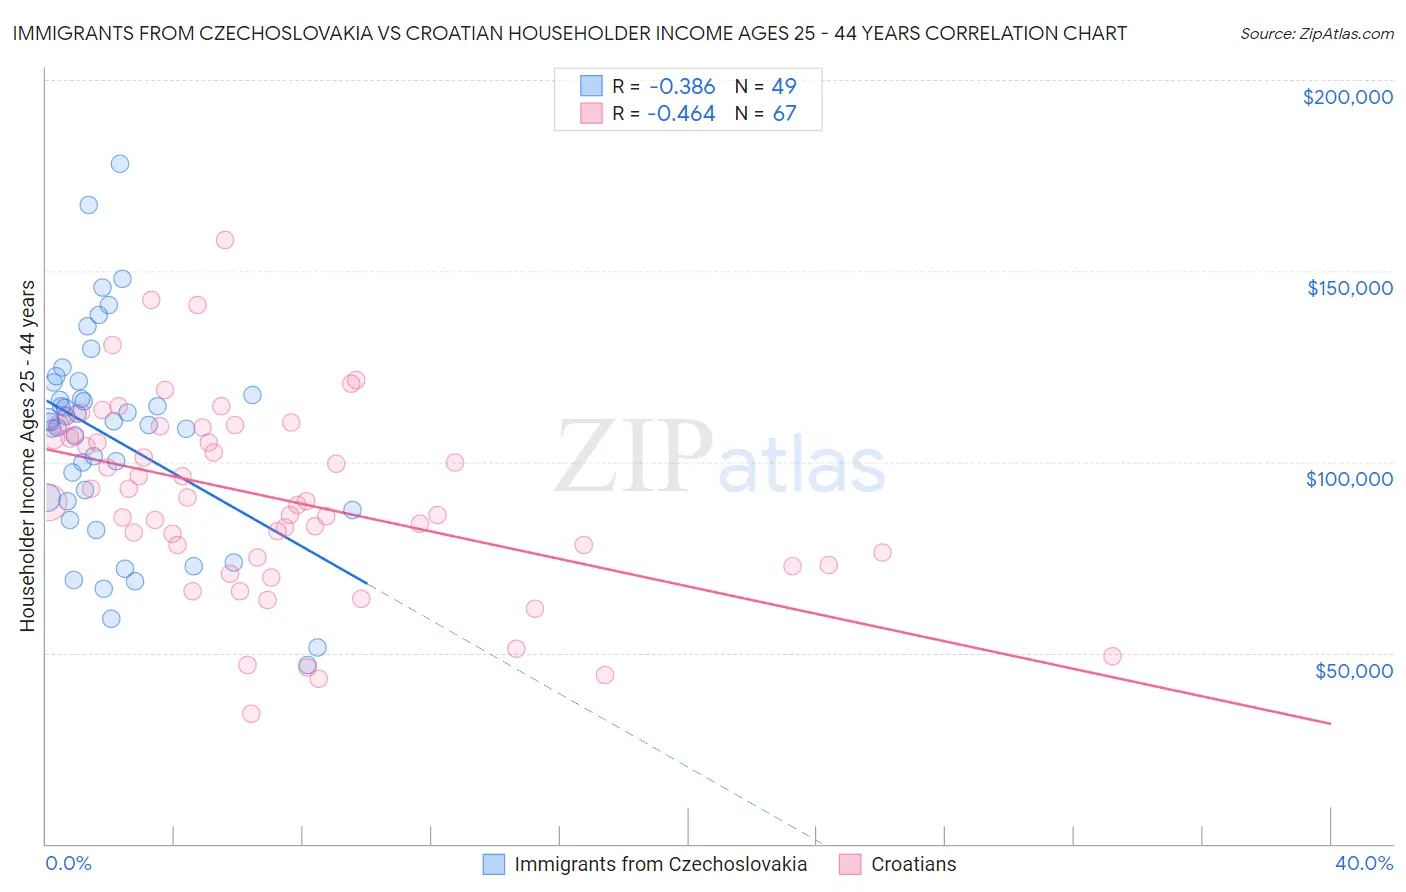 Immigrants from Czechoslovakia vs Croatian Householder Income Ages 25 - 44 years